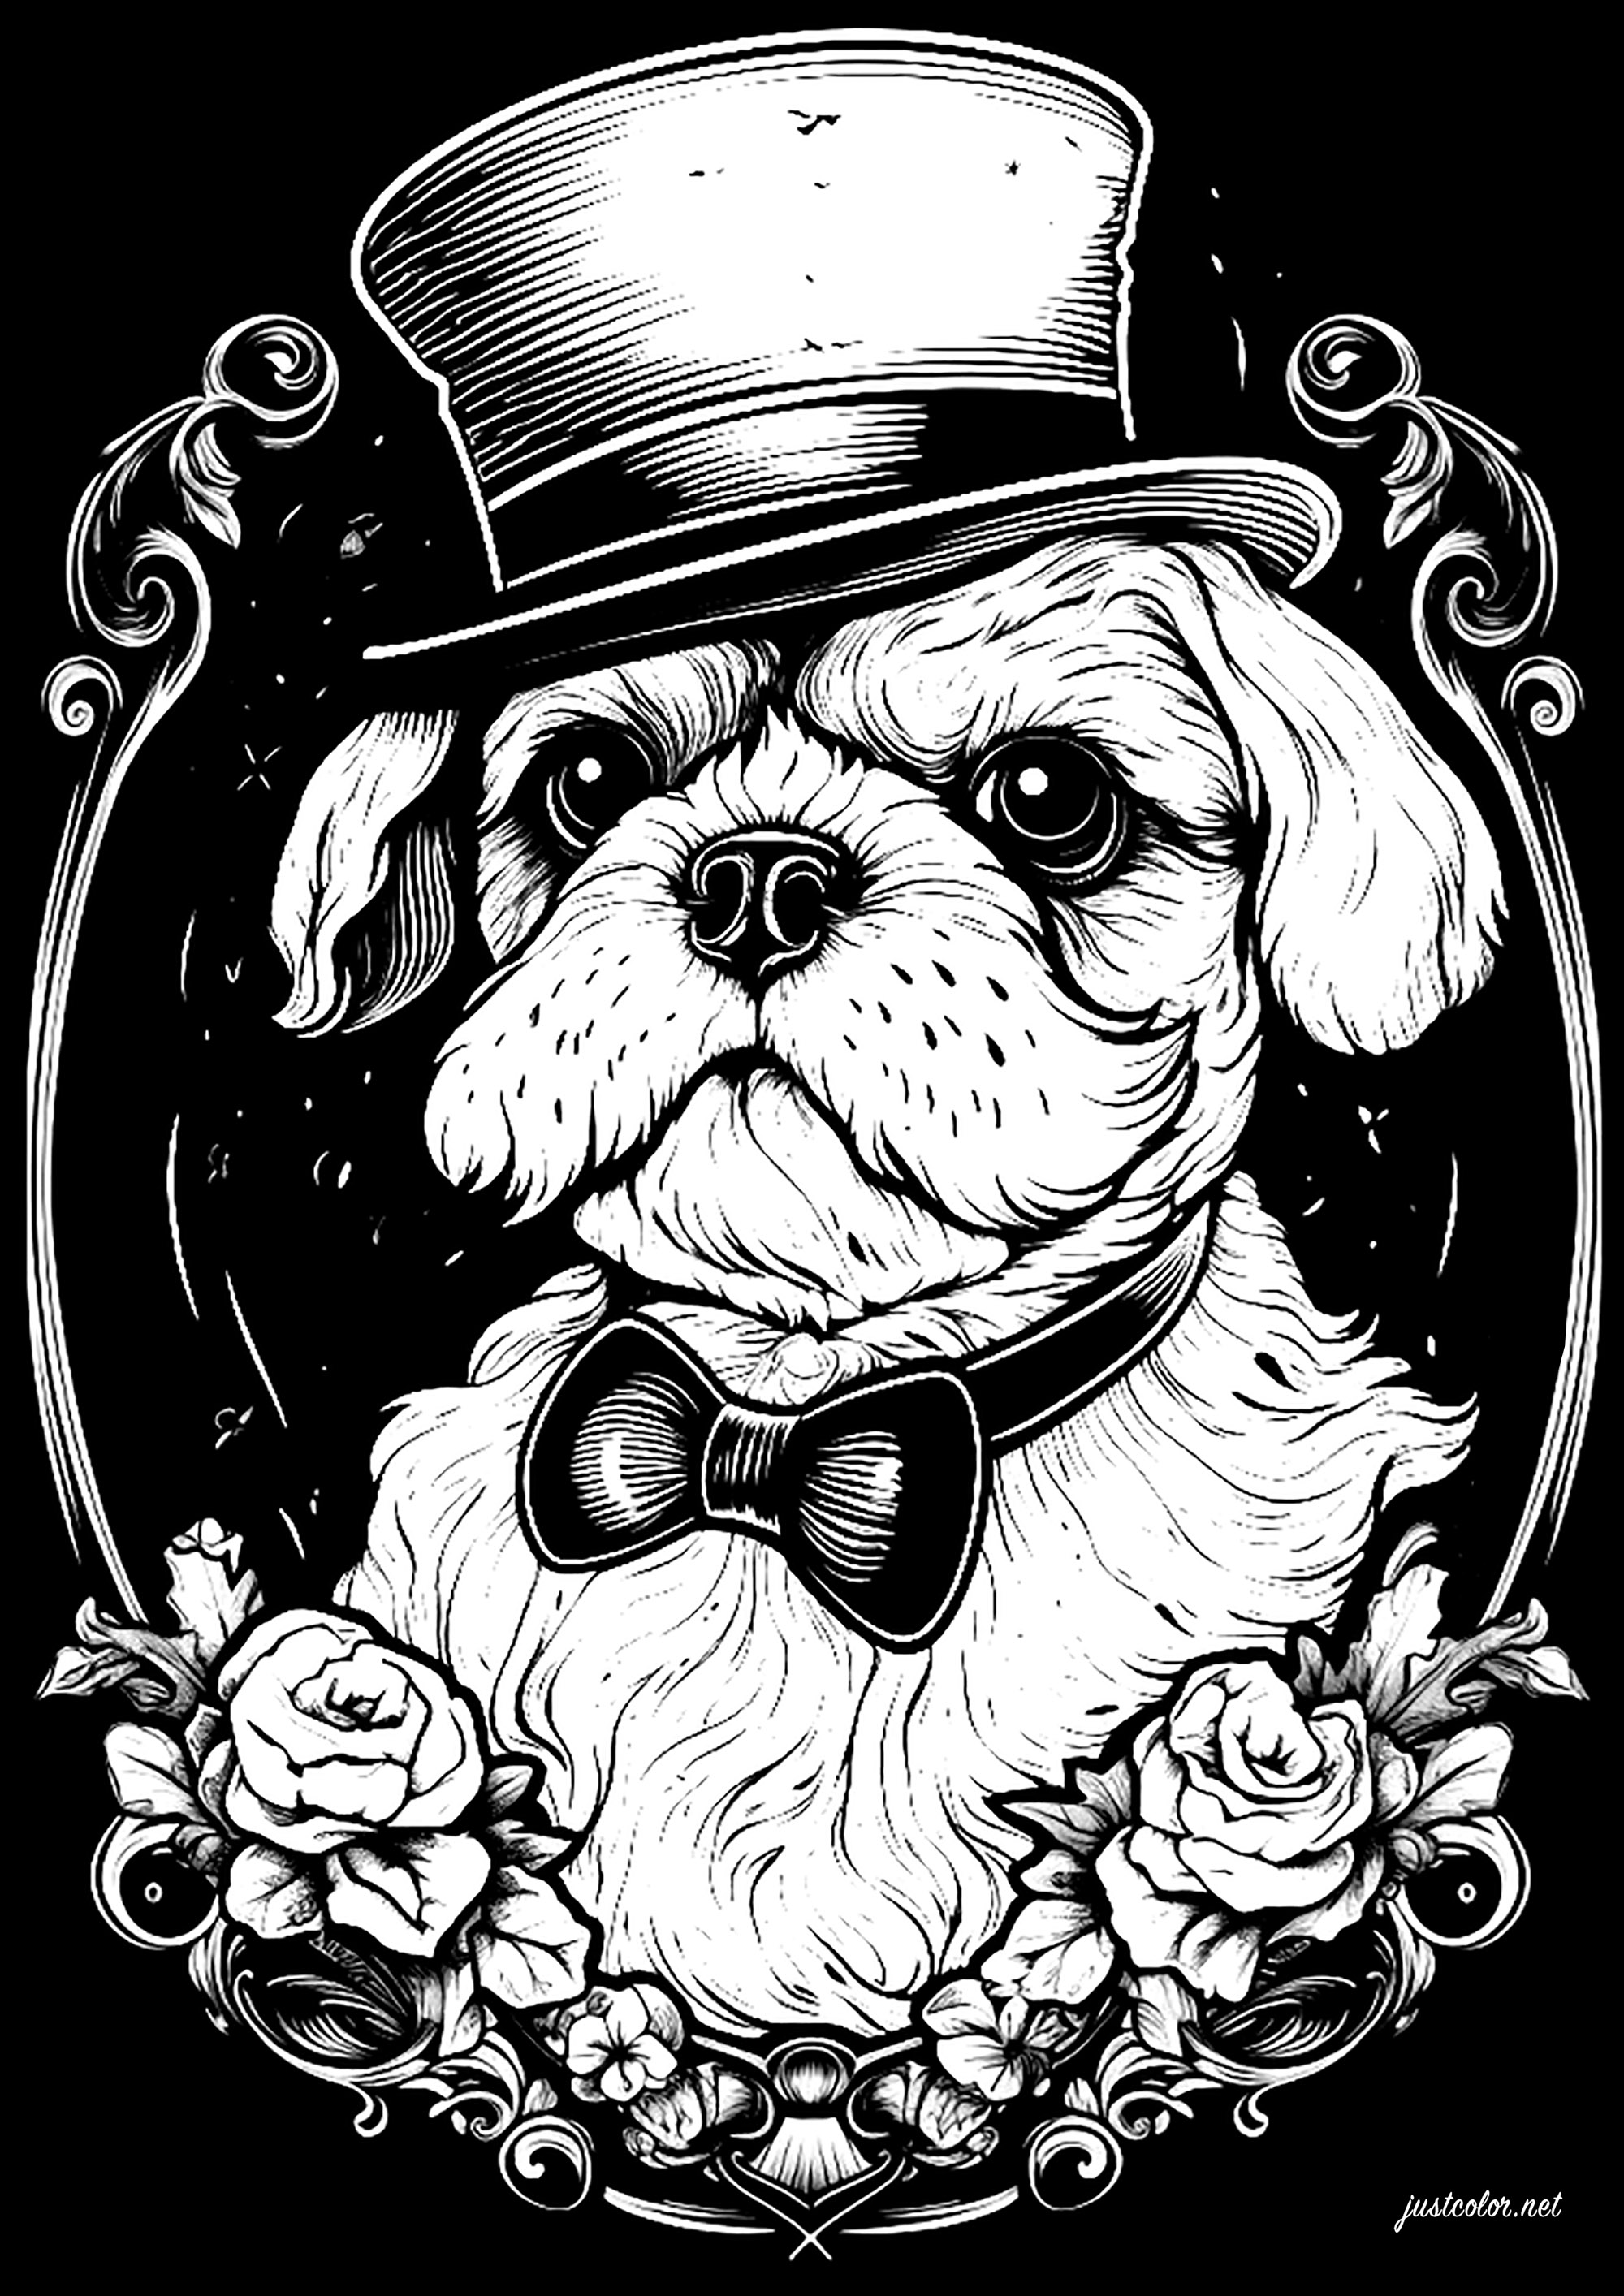 Dog with a hat. Colouring on a black background, with an elegant, retro style